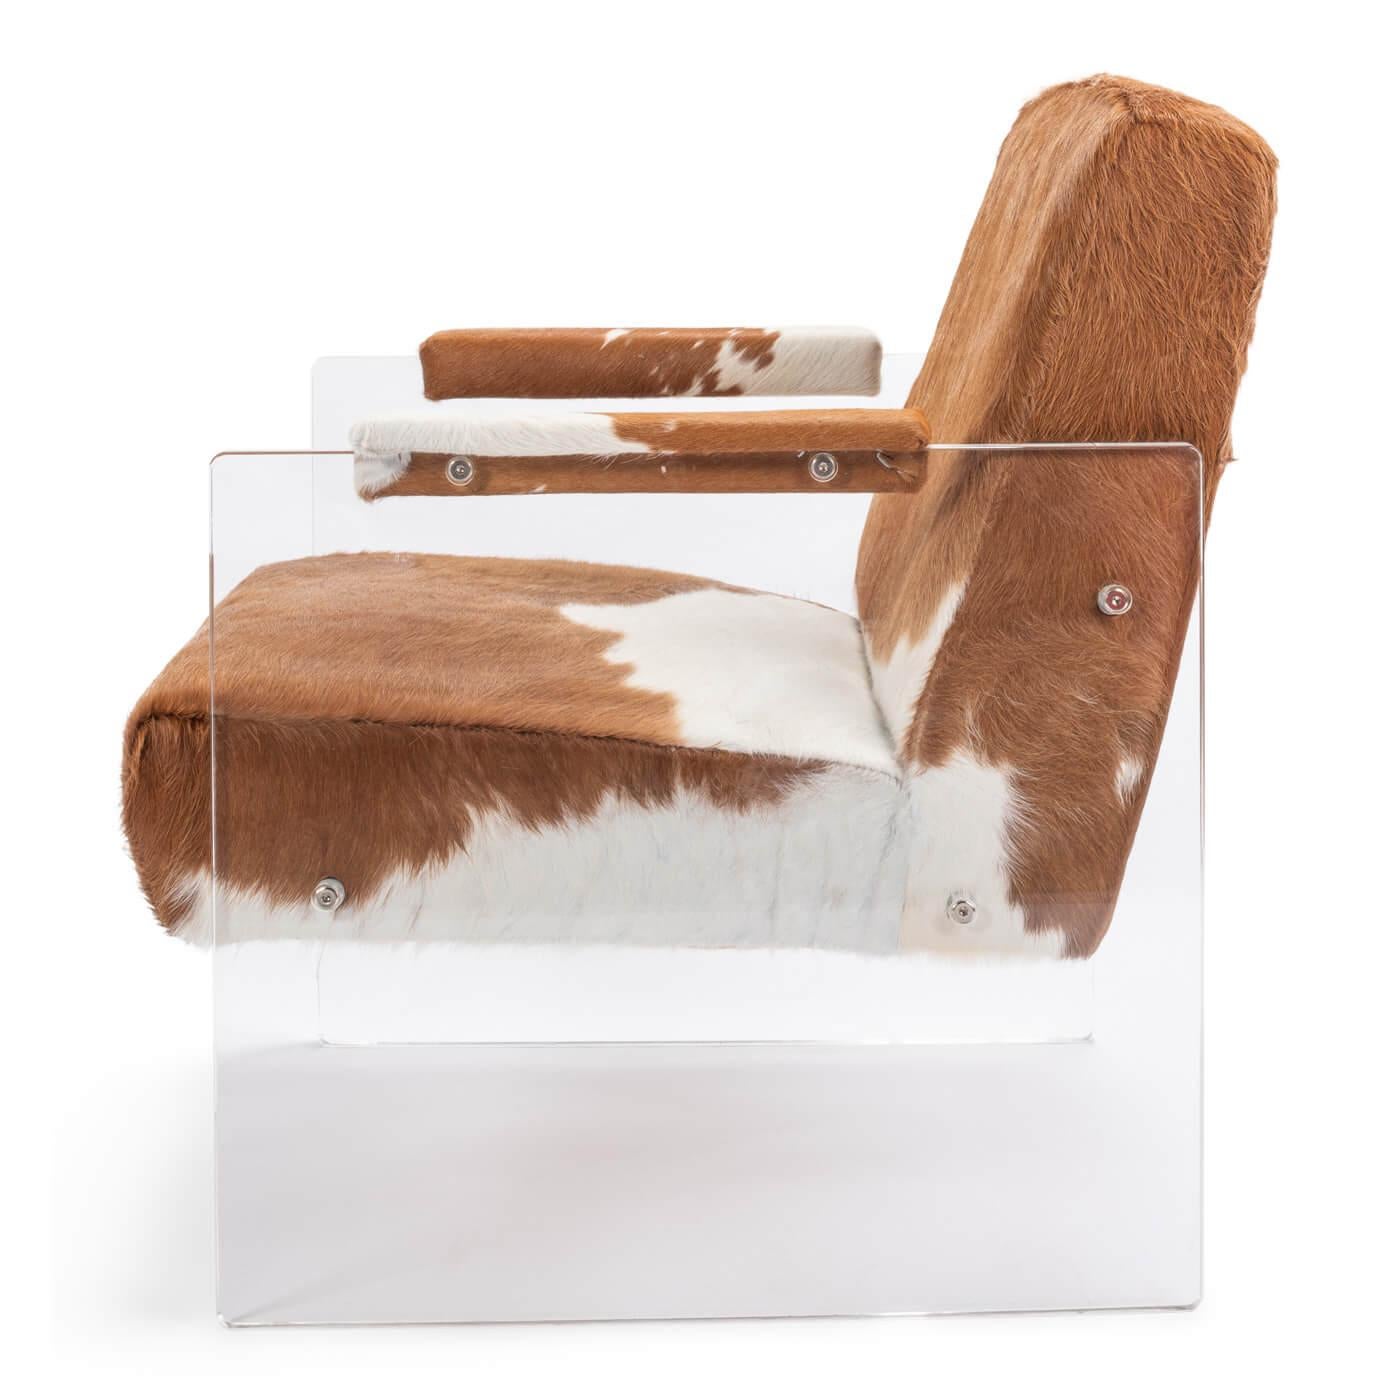 A cowhide and lucite armchair with a modern vintage-western feel, featuring luxe lucite acrylic sides and a brown with white cowhide seat and back. A unique combination of materials makes this piece a true statement piece in any room. Cowhide padded